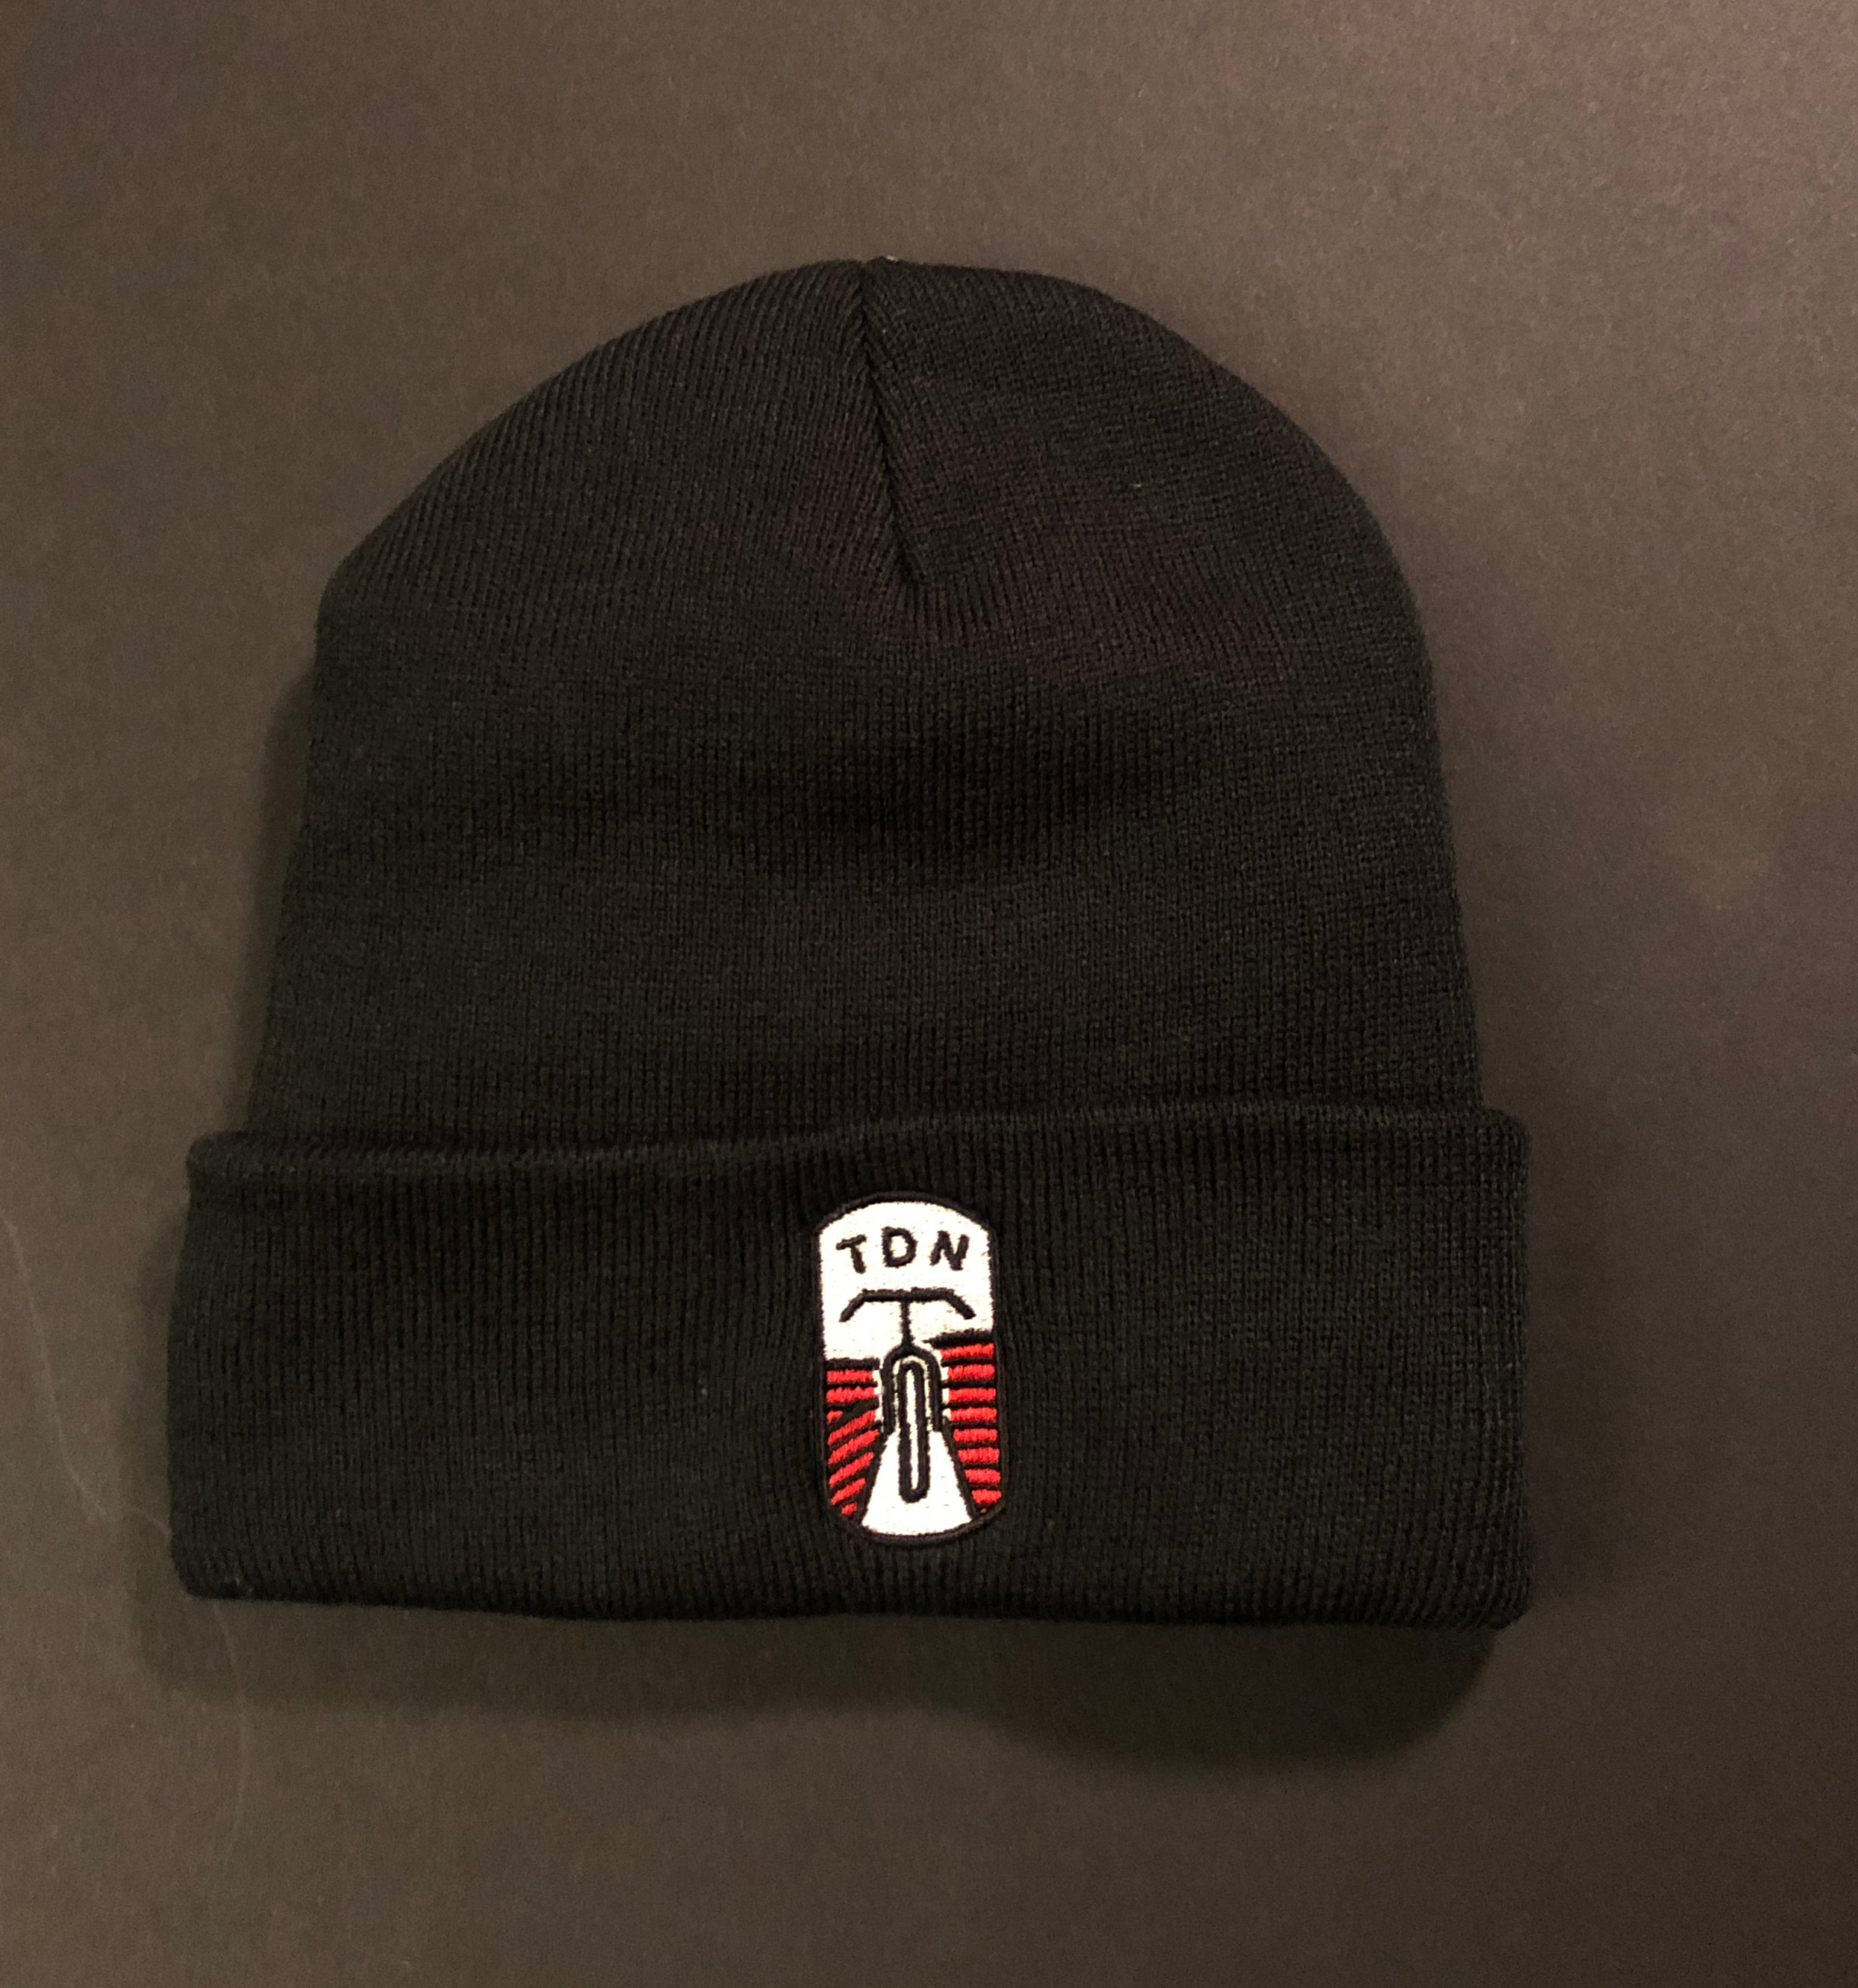 Stocking Cap (Shipping Included)